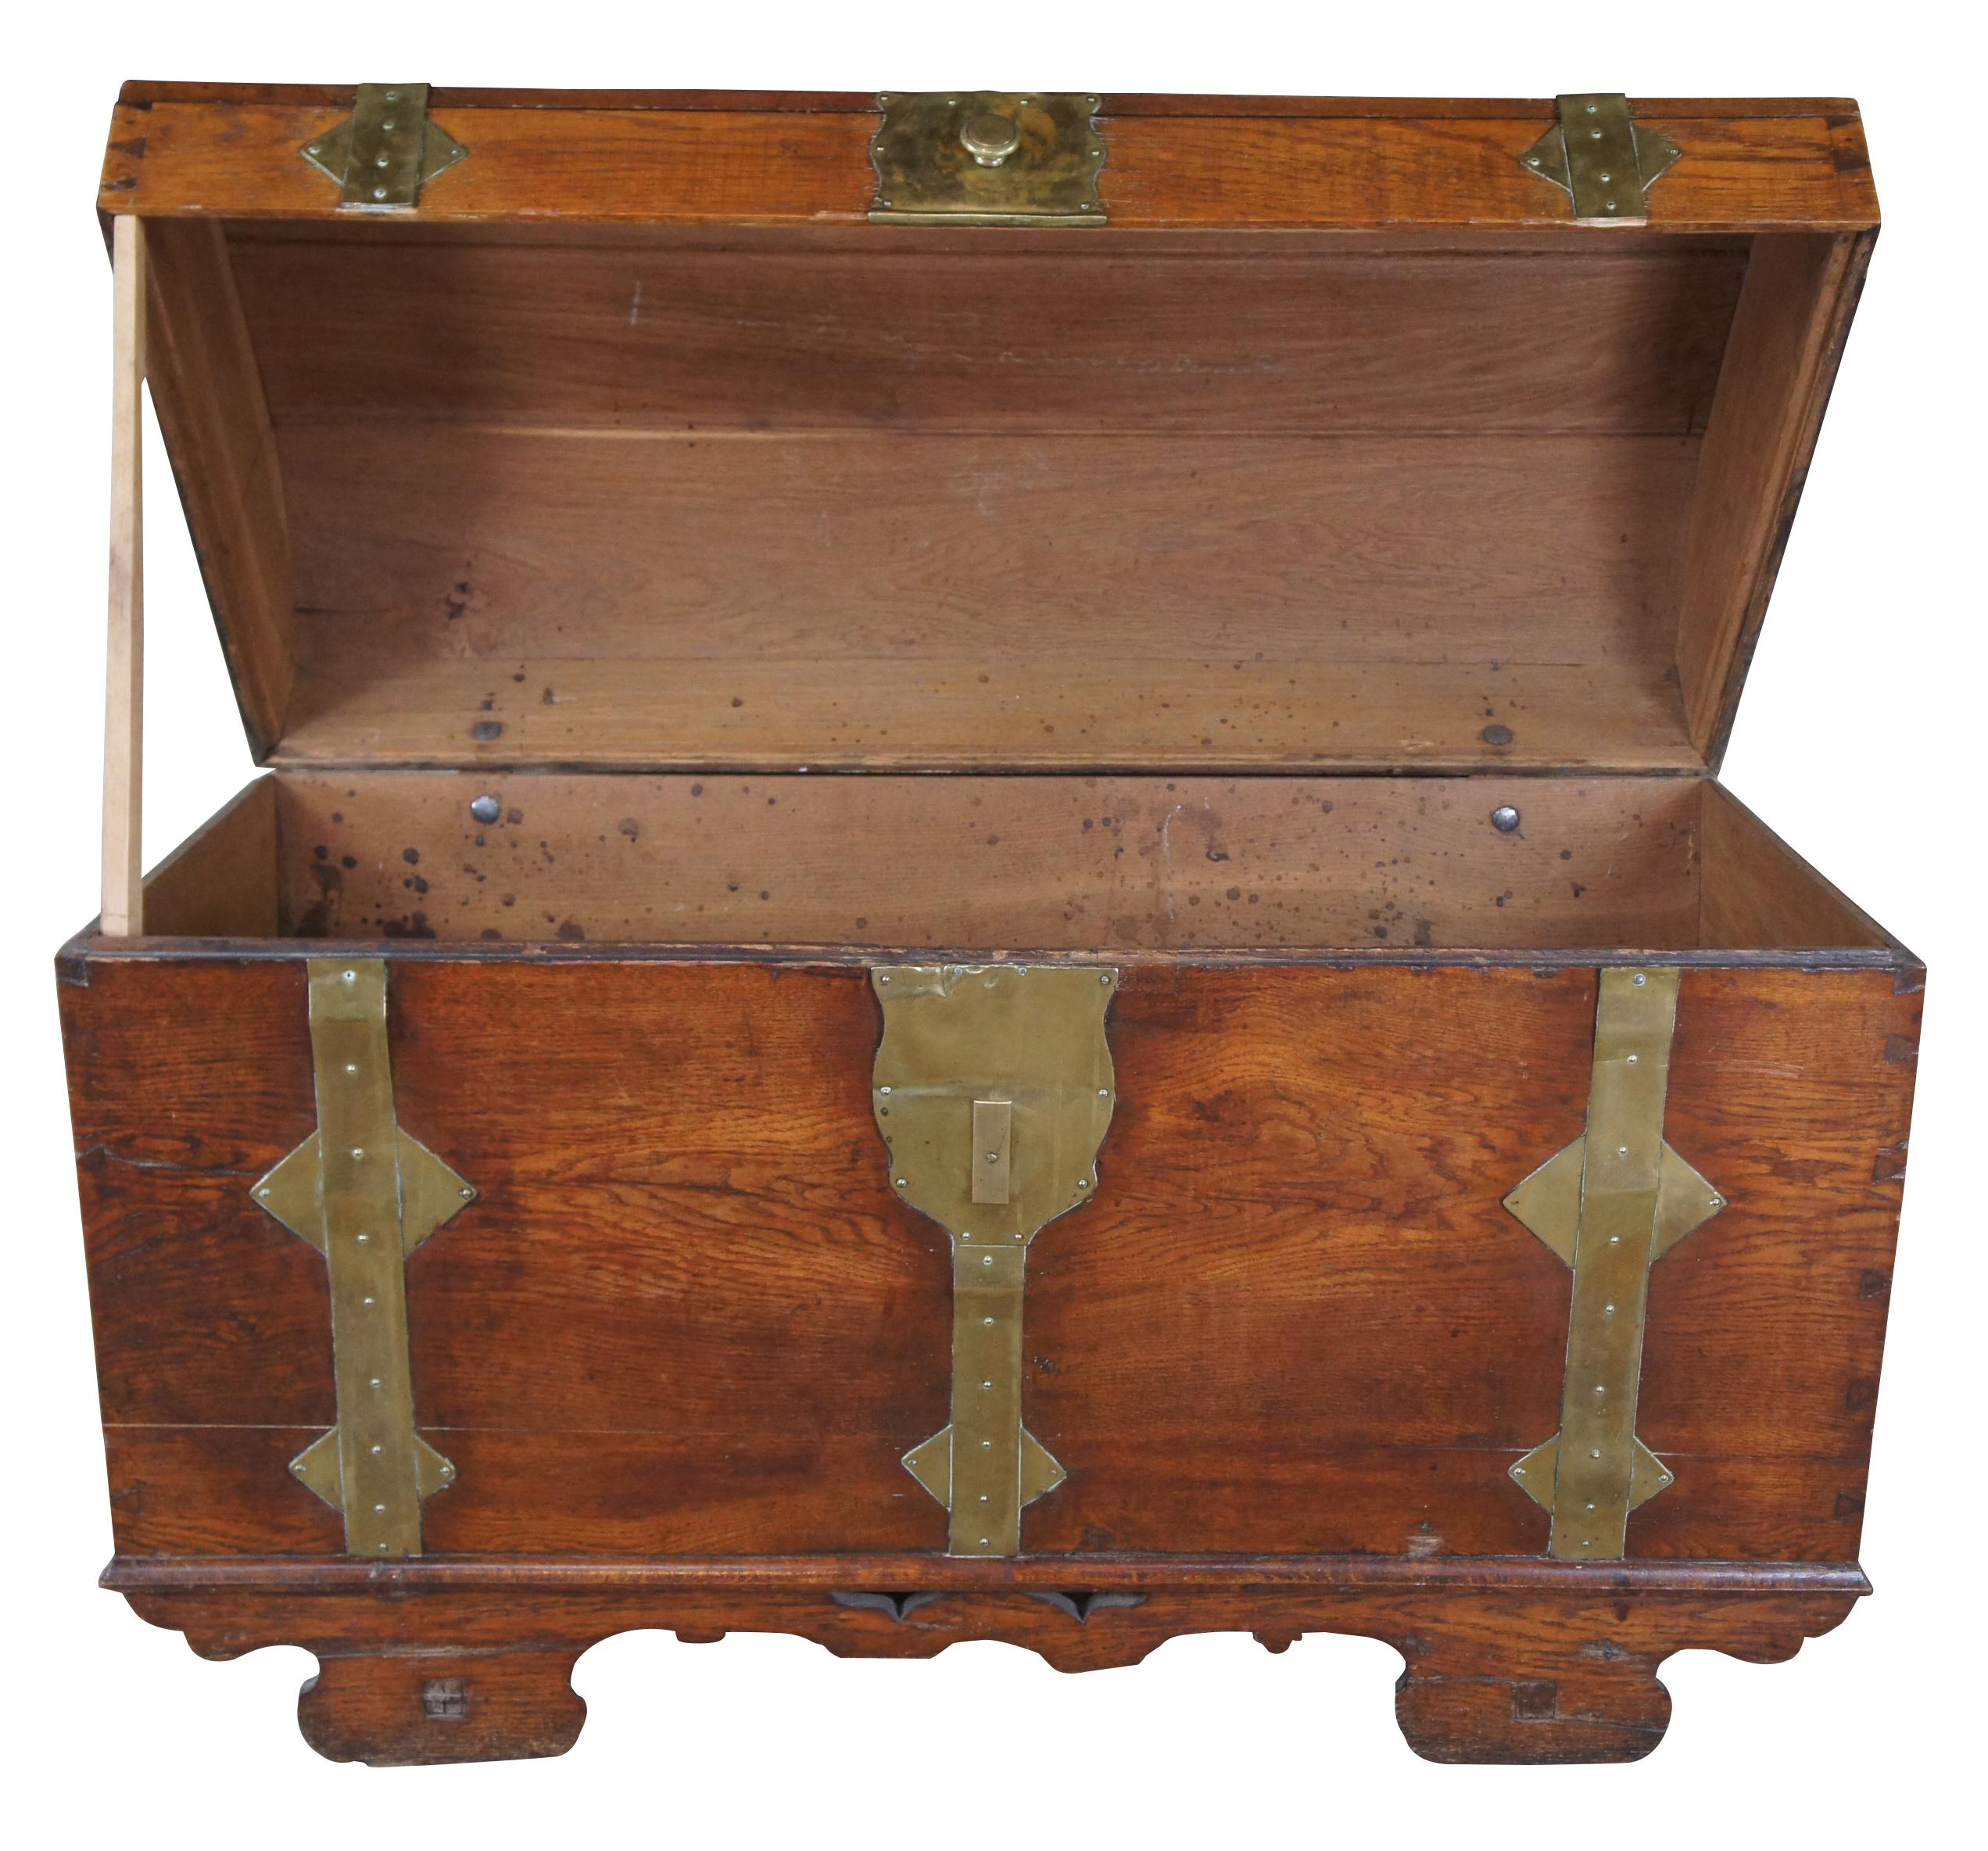 An extraordinary and extremely rare primitive early 18th Century Baroque trunk or chest.  Made of oak featuring a domed top with brass bound hardware and pegged wood wheels.  Includes hand dovetailing and forged brass handles.  
 